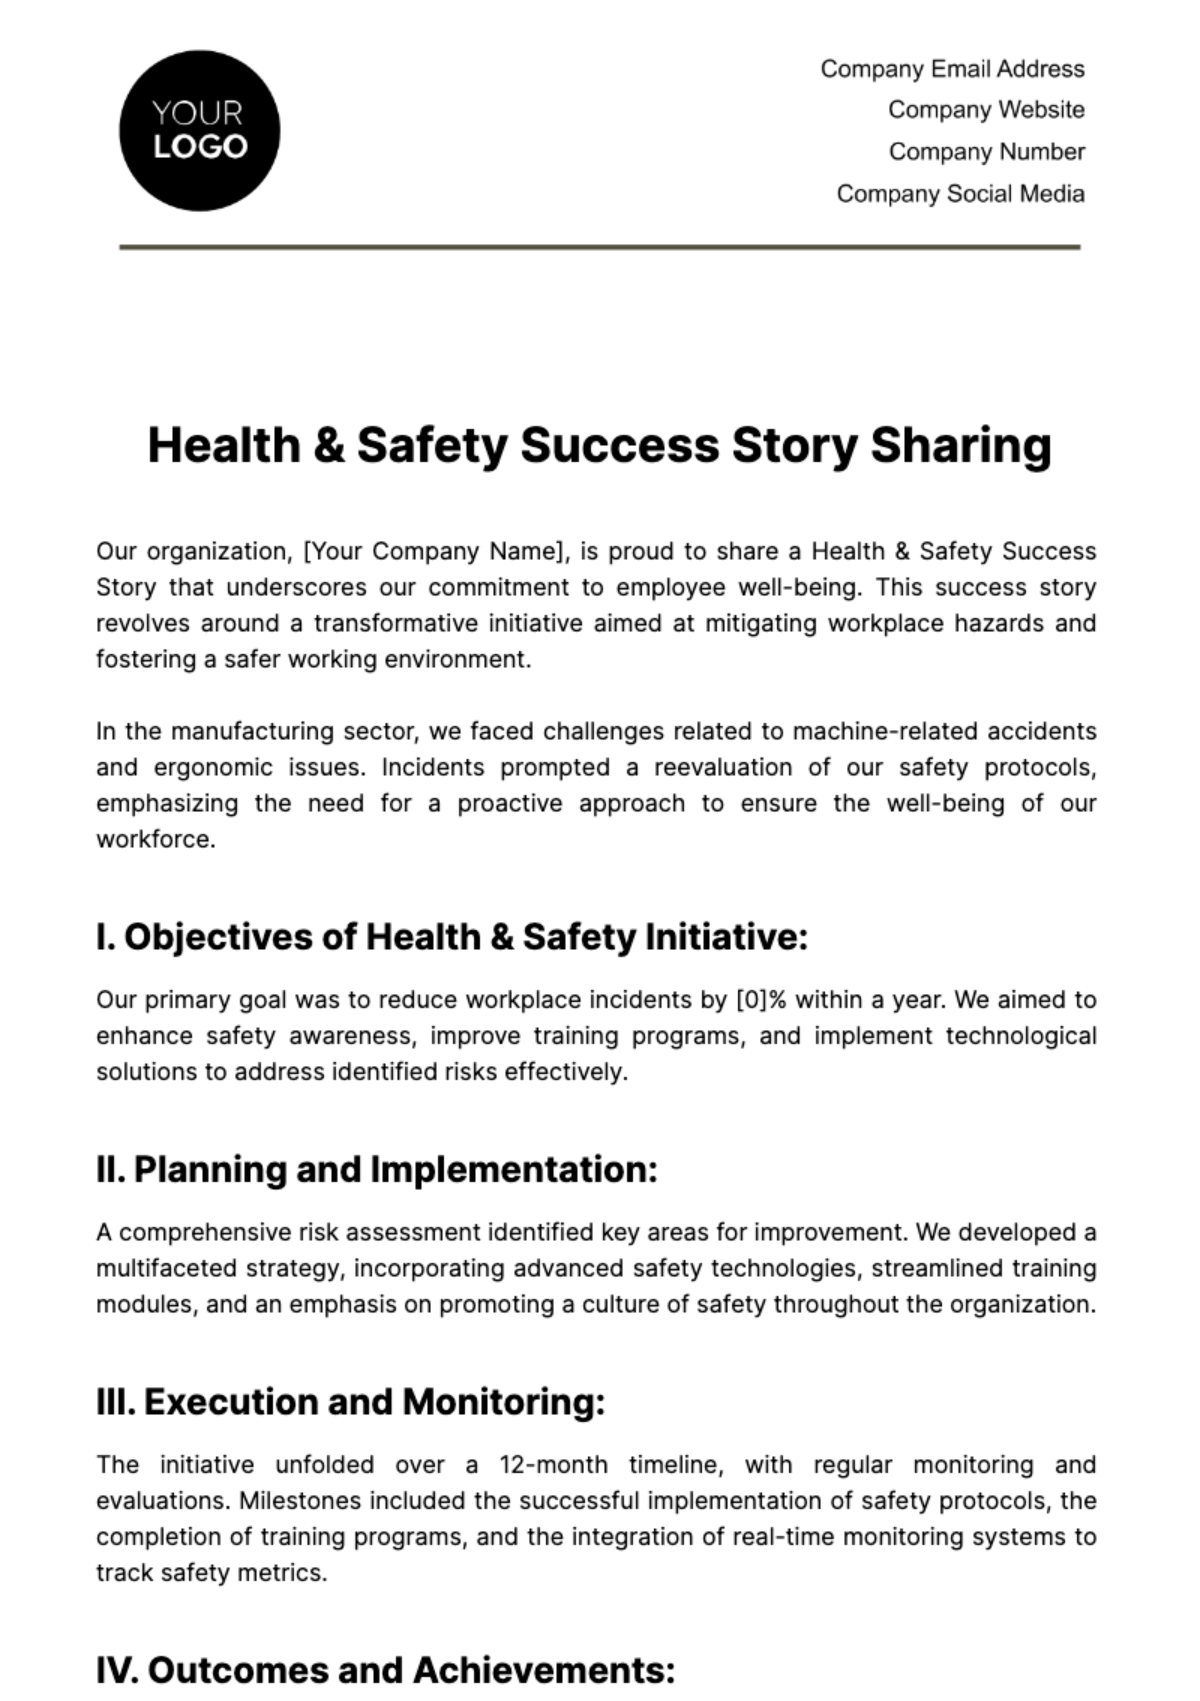 Free Health & Safety Success Story Sharing Template